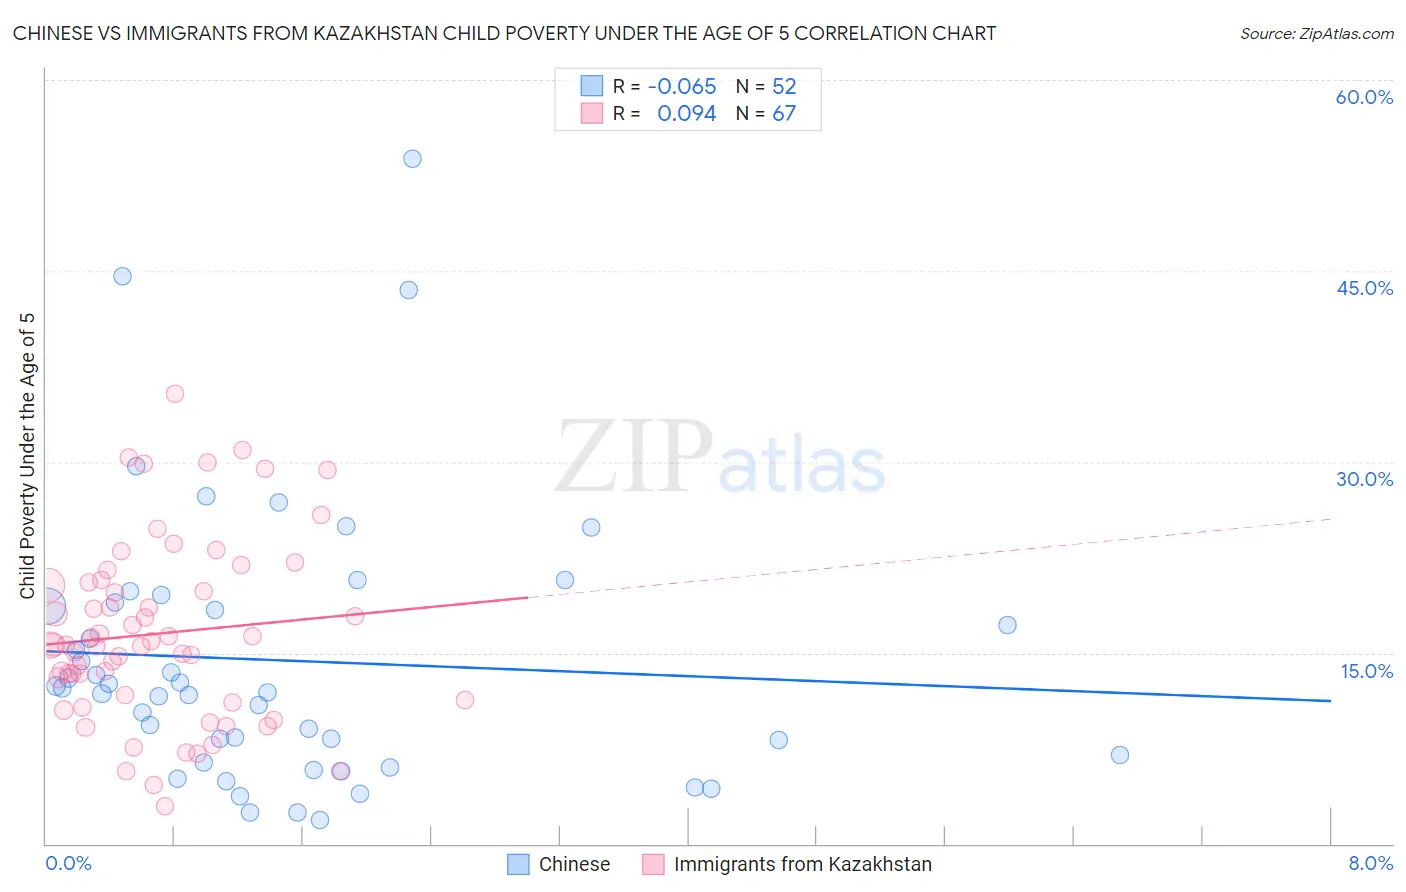 Chinese vs Immigrants from Kazakhstan Child Poverty Under the Age of 5